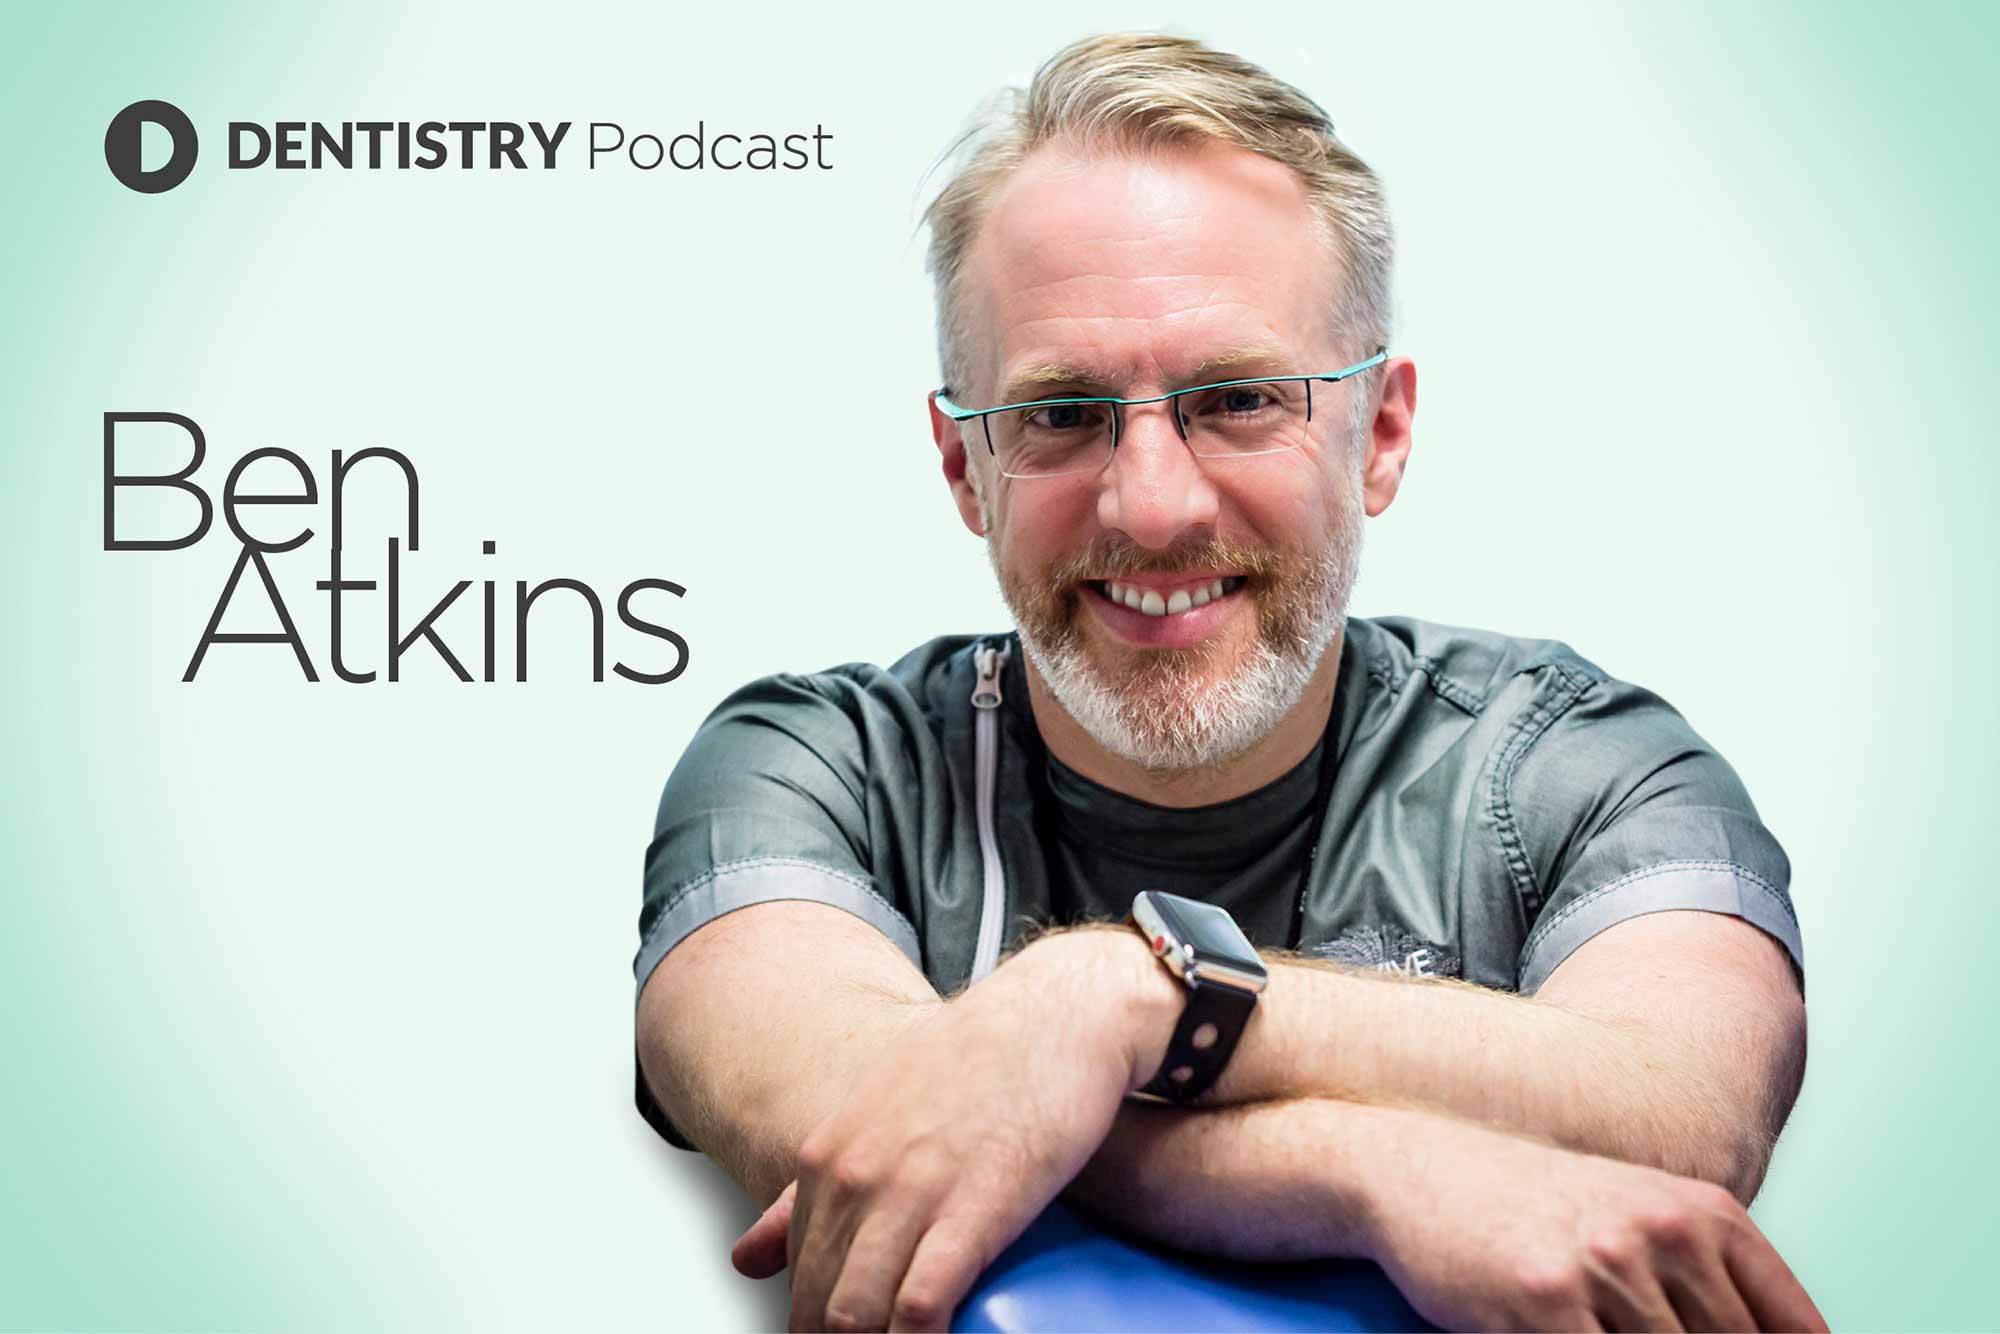 Dentistry Online podcast with Ben Atkins